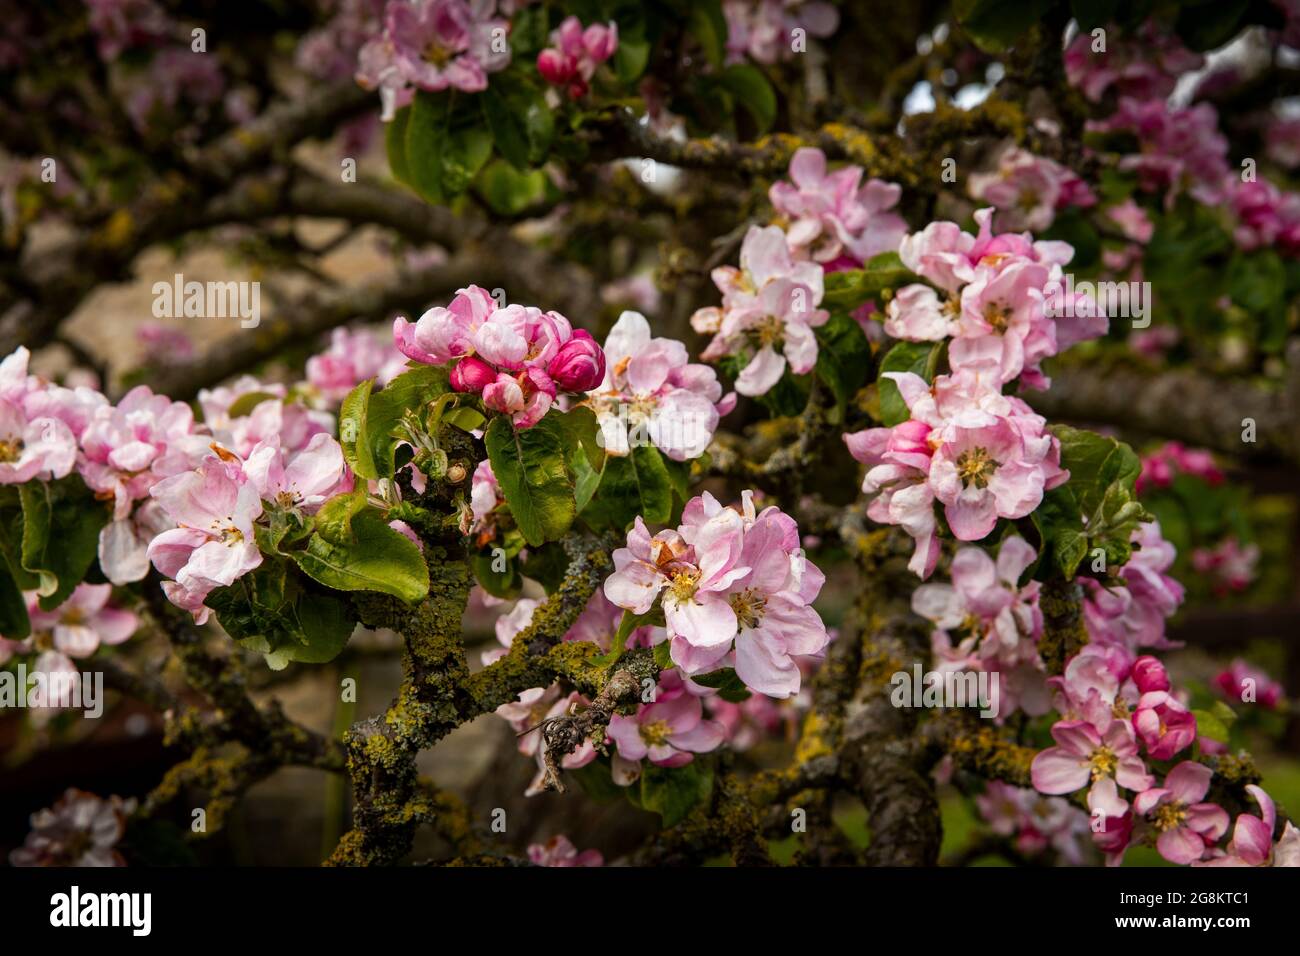 UK, England, Worcestershire, Vale of Evesham Blossom Trail, old apple tree in flower Stock Photo